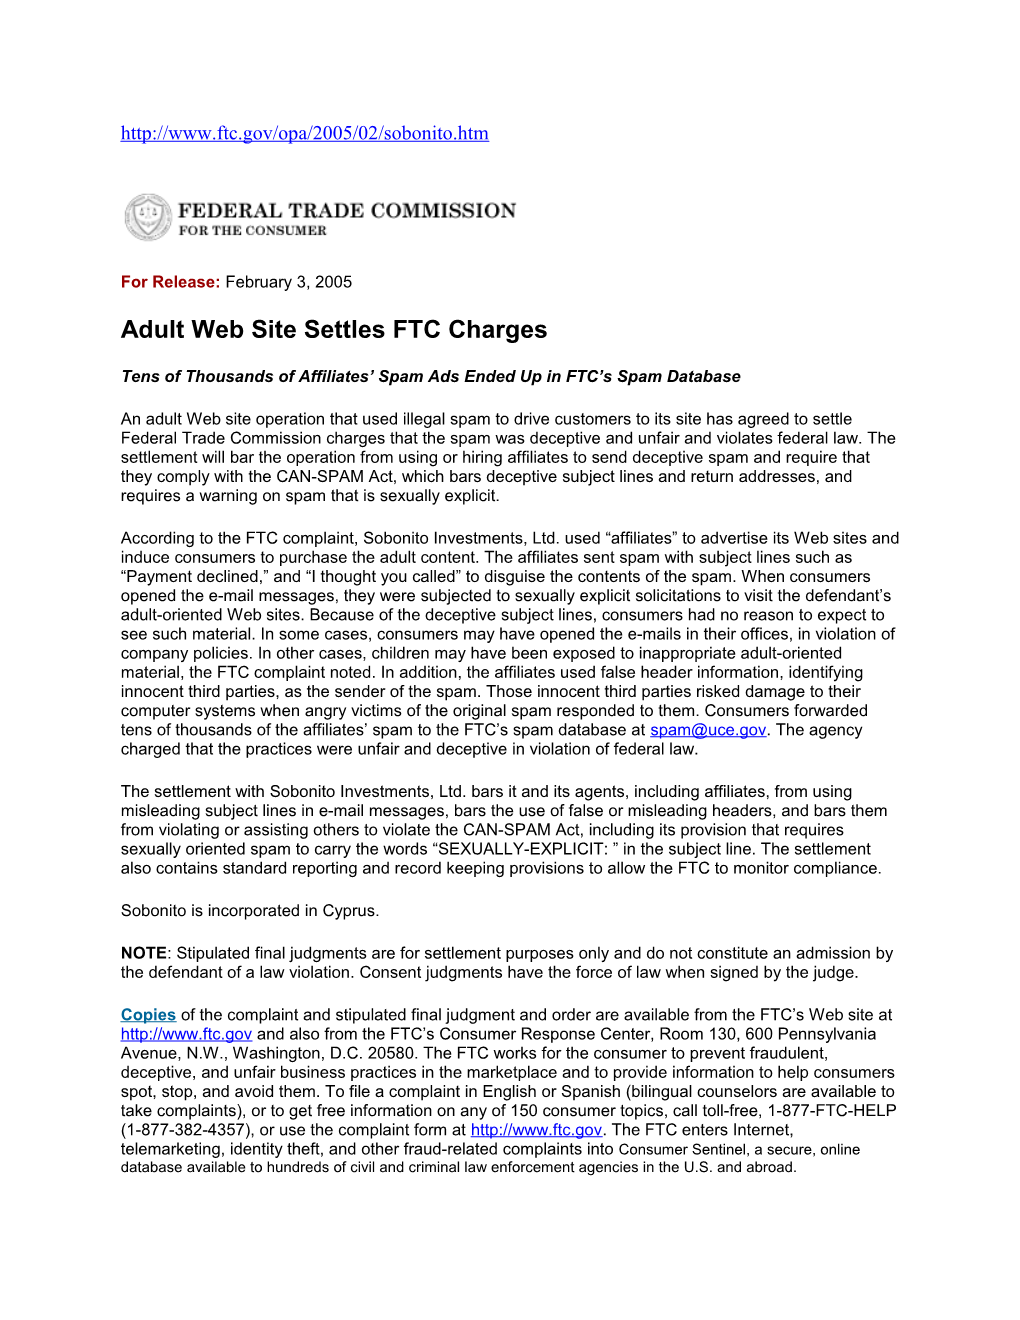 Adult Web Site Settles FTC Charges